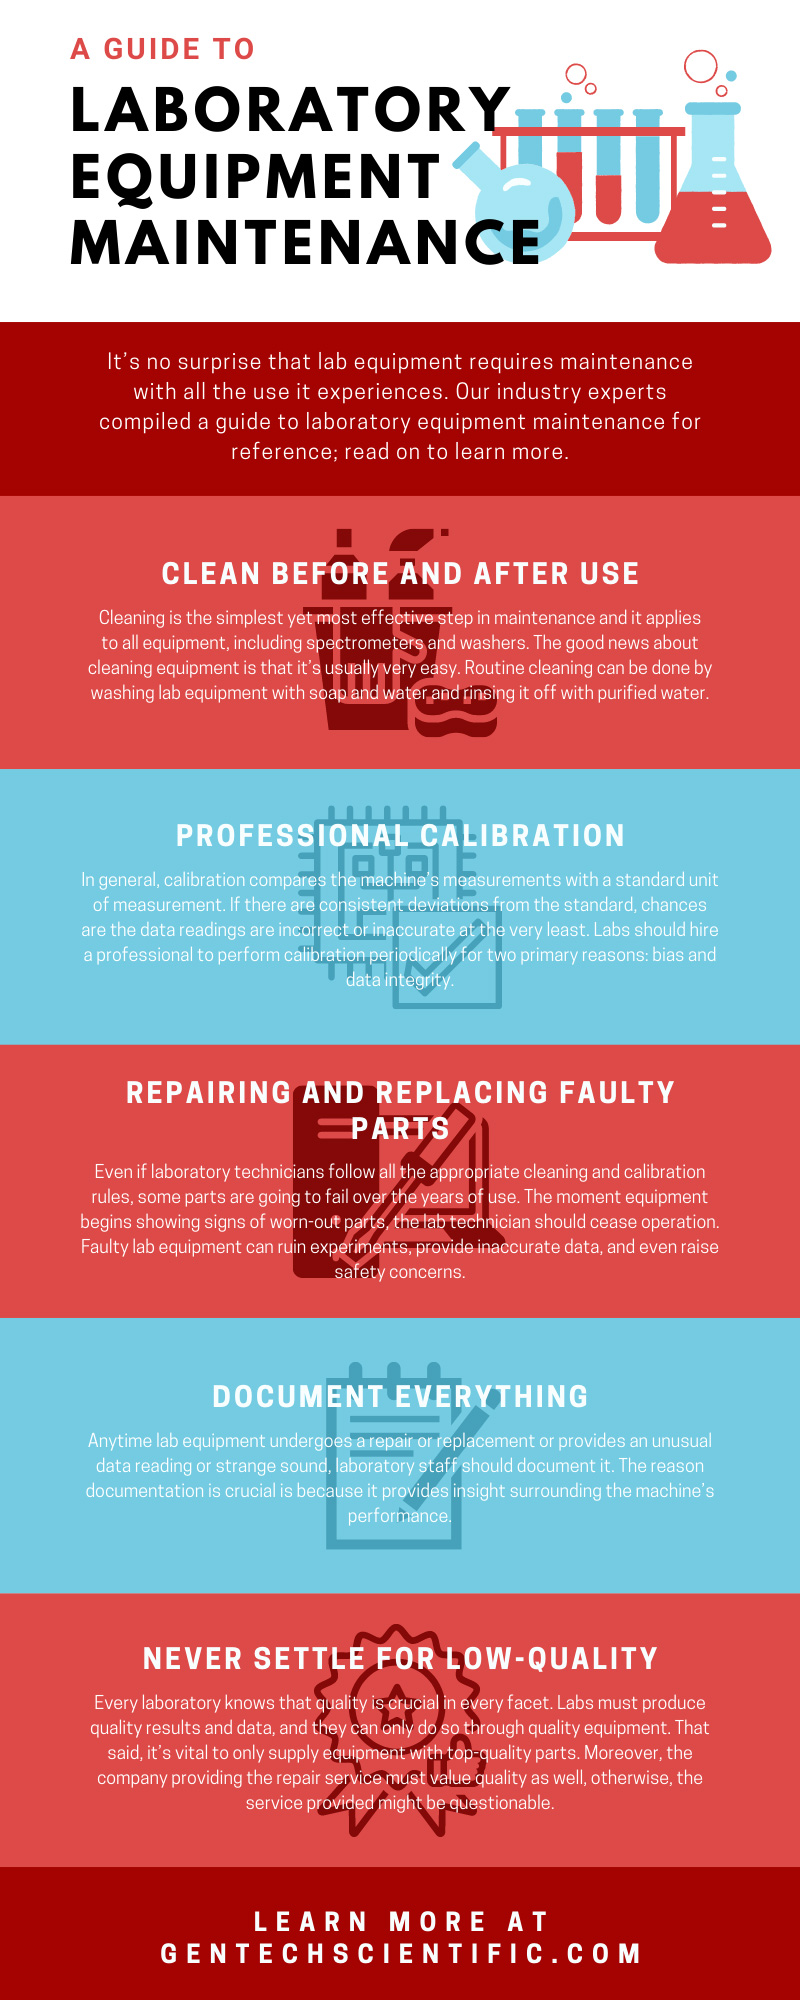 A Guide To Laboratory Equipment Maintenance infographic